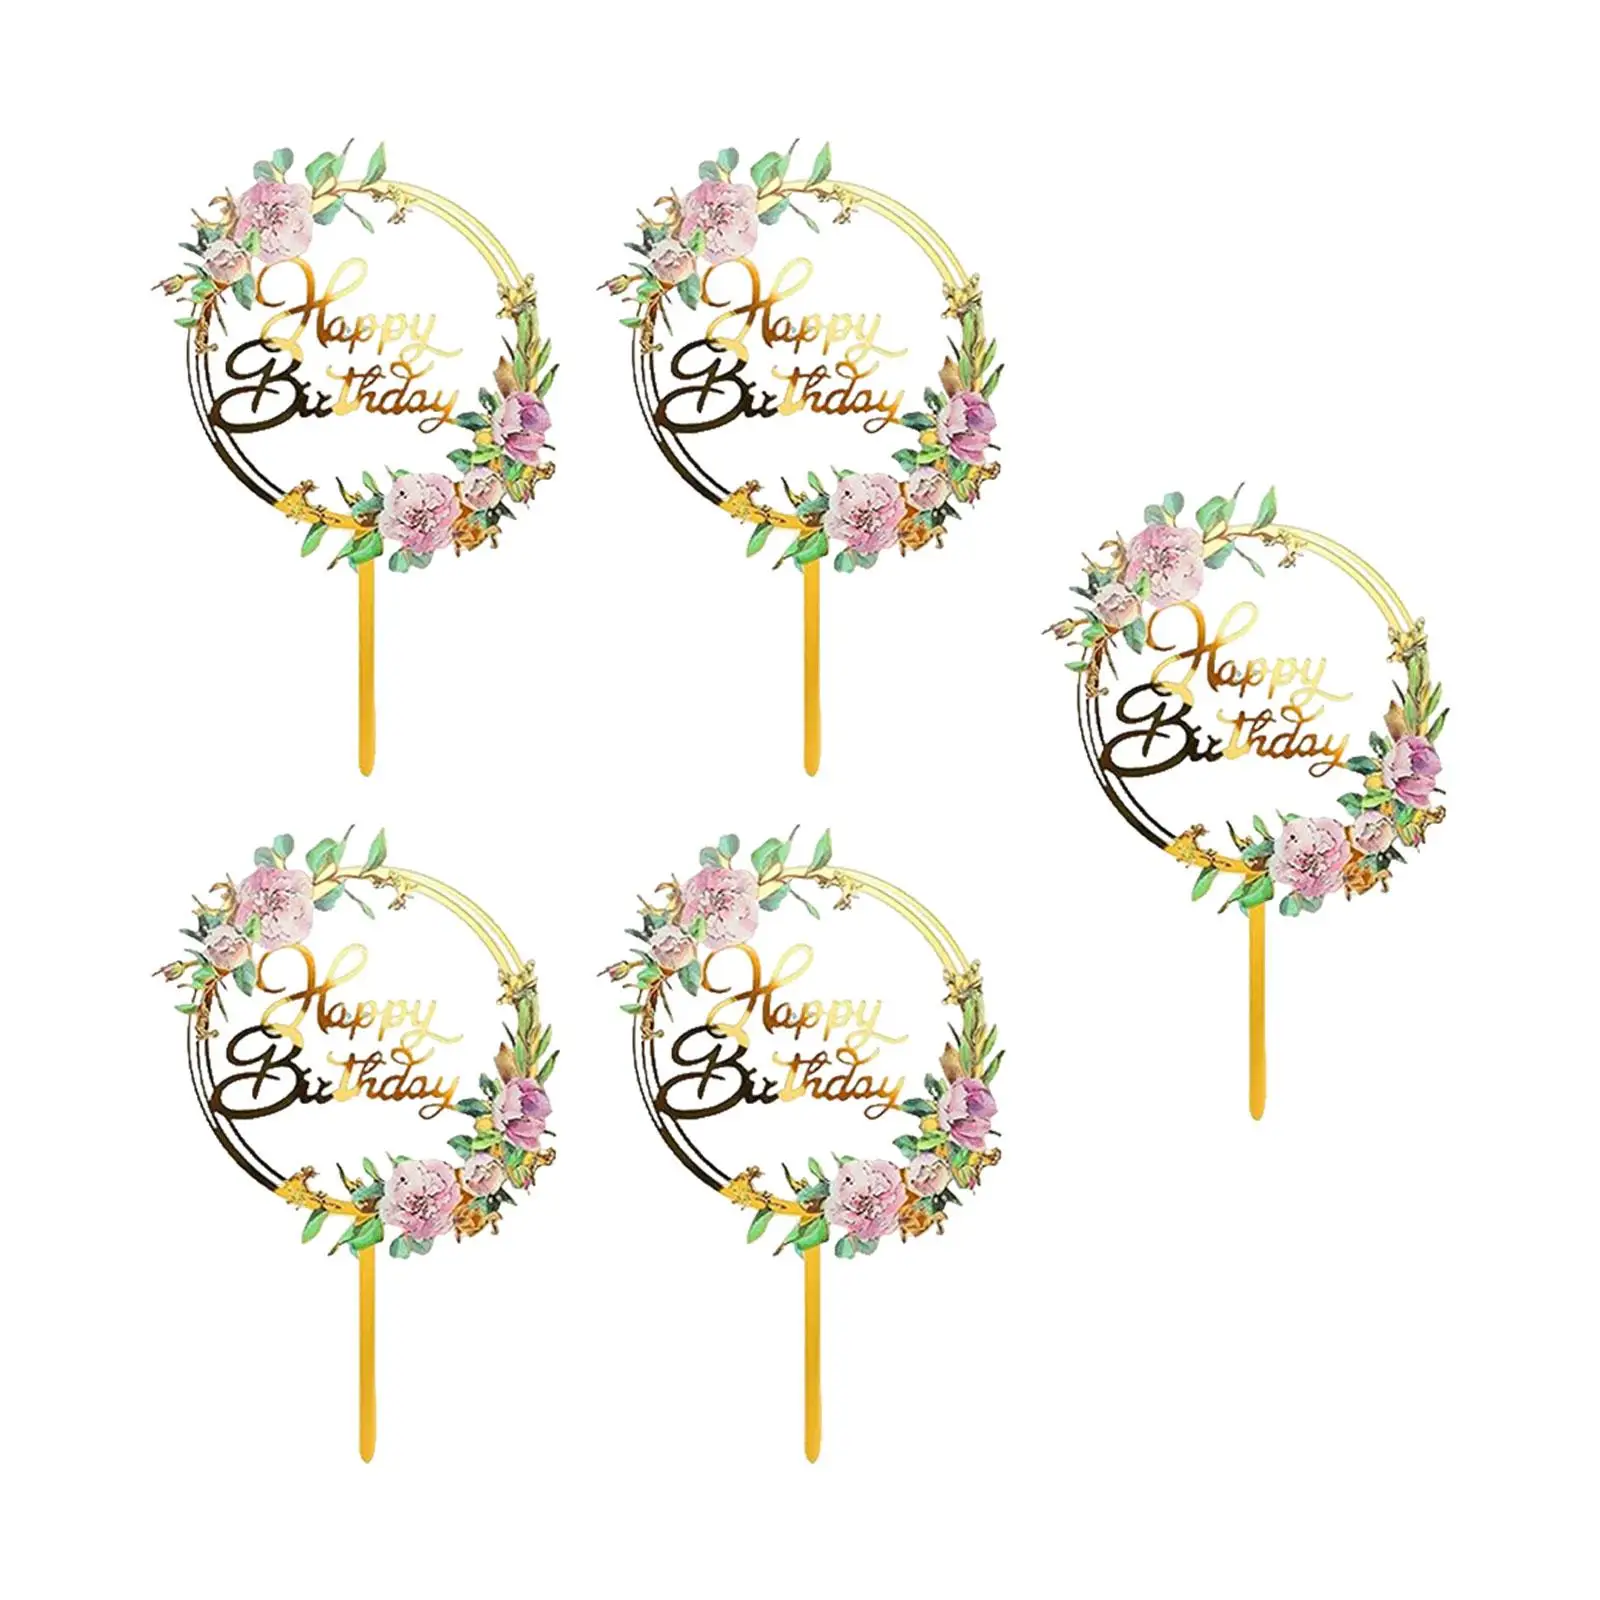 5x Pastoral Cake Toppers Party Favors Elegant Colorful Cake Decorations Delicate Acrylic Desserts Cupcake Toppers for Engagement